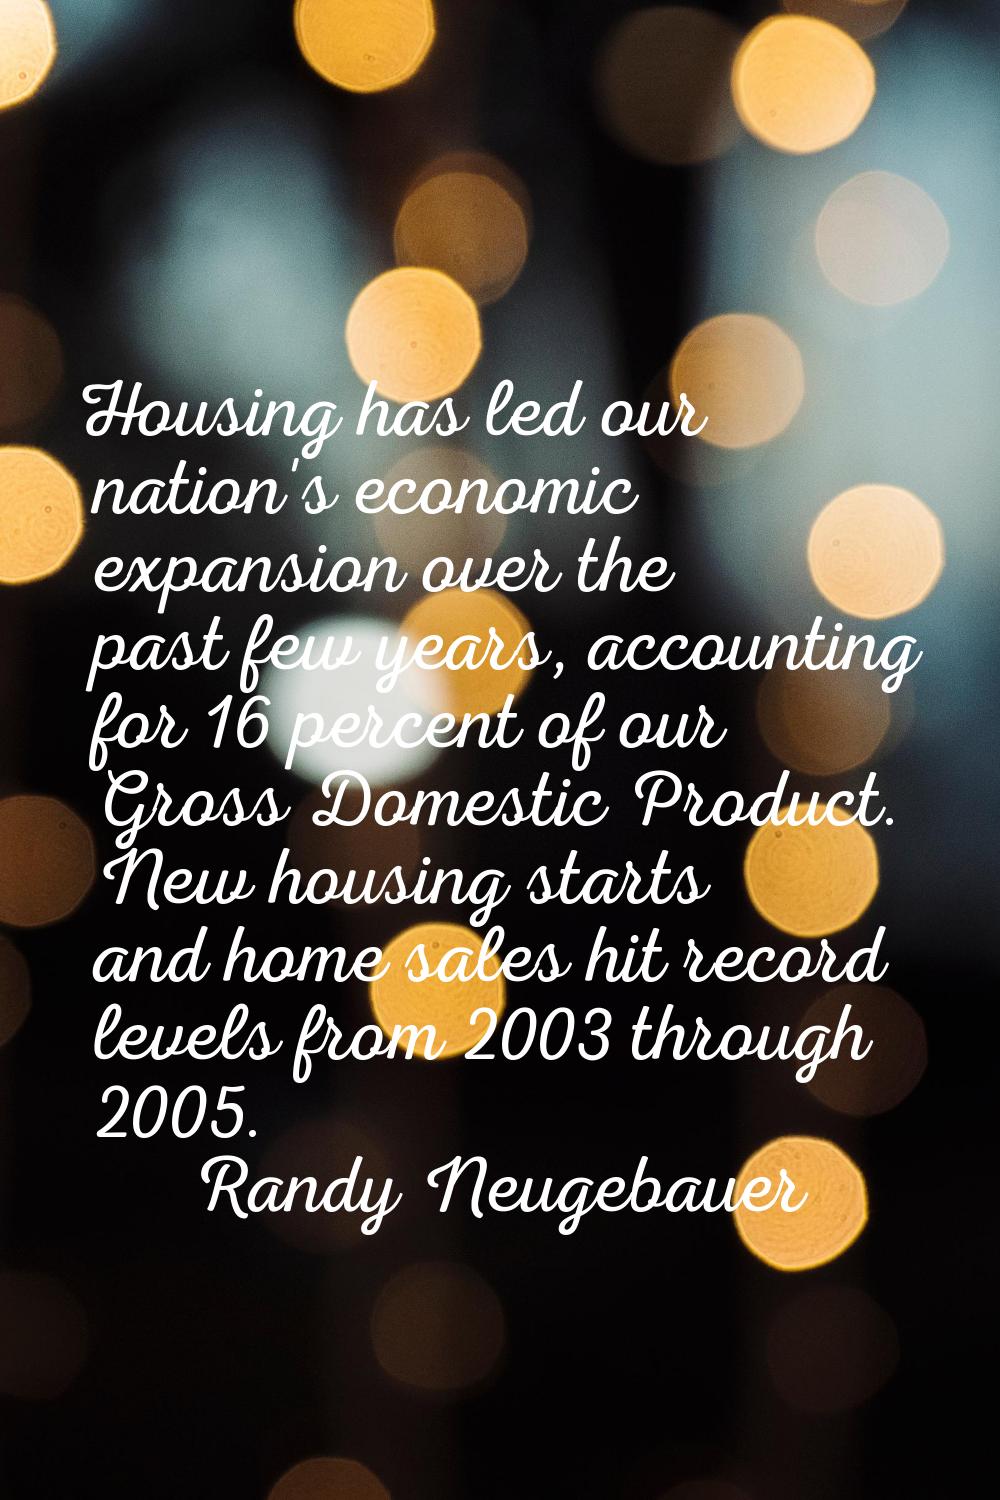 Housing has led our nation's economic expansion over the past few years, accounting for 16 percent 